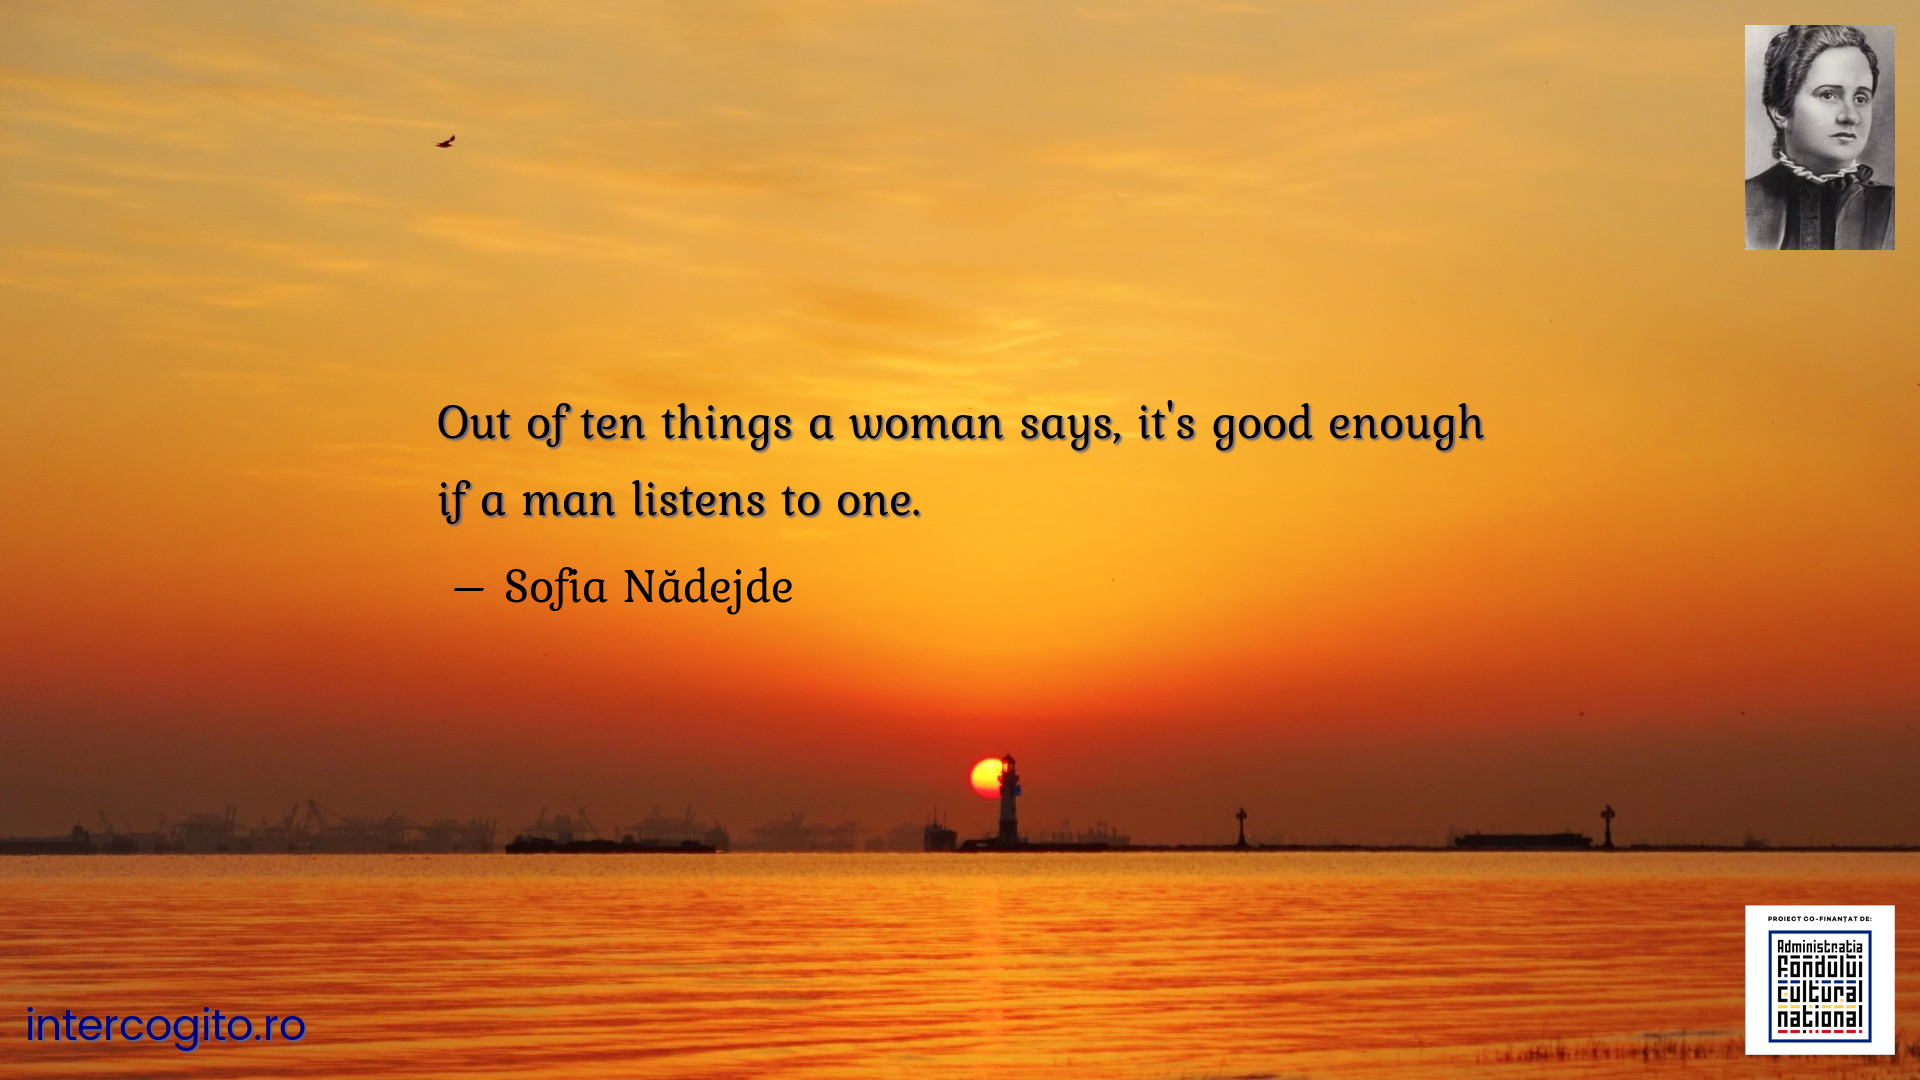 Out of ten things a woman says, it's good enough if a man listens to one.